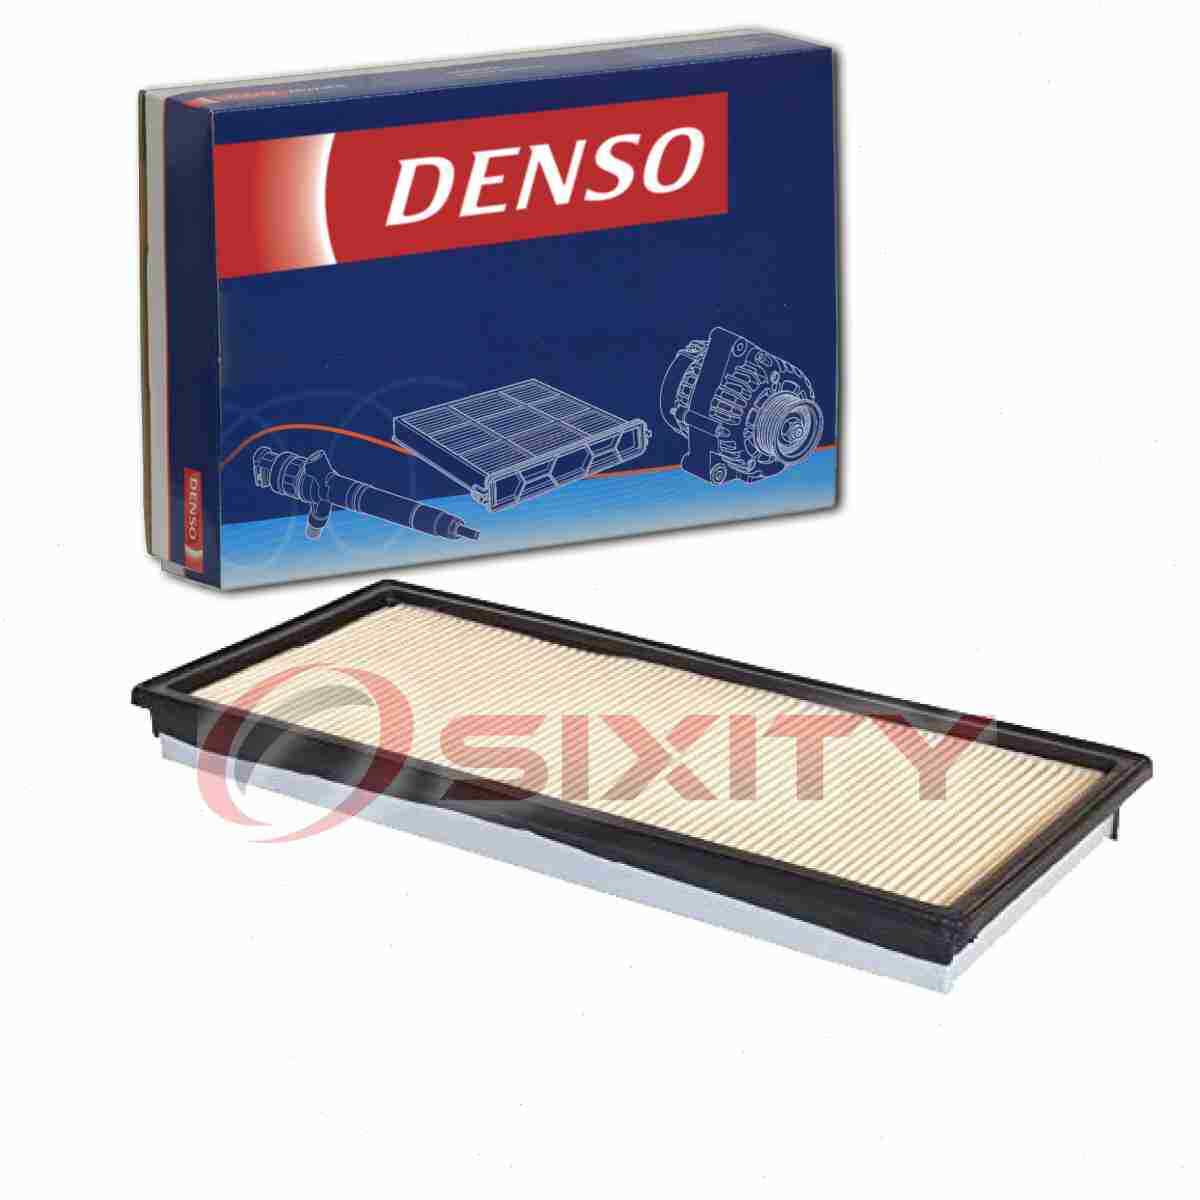 Denso Air Filter for 2000-2004 Subaru Forester 2.5L H4 Intake Inlet Manifold pw